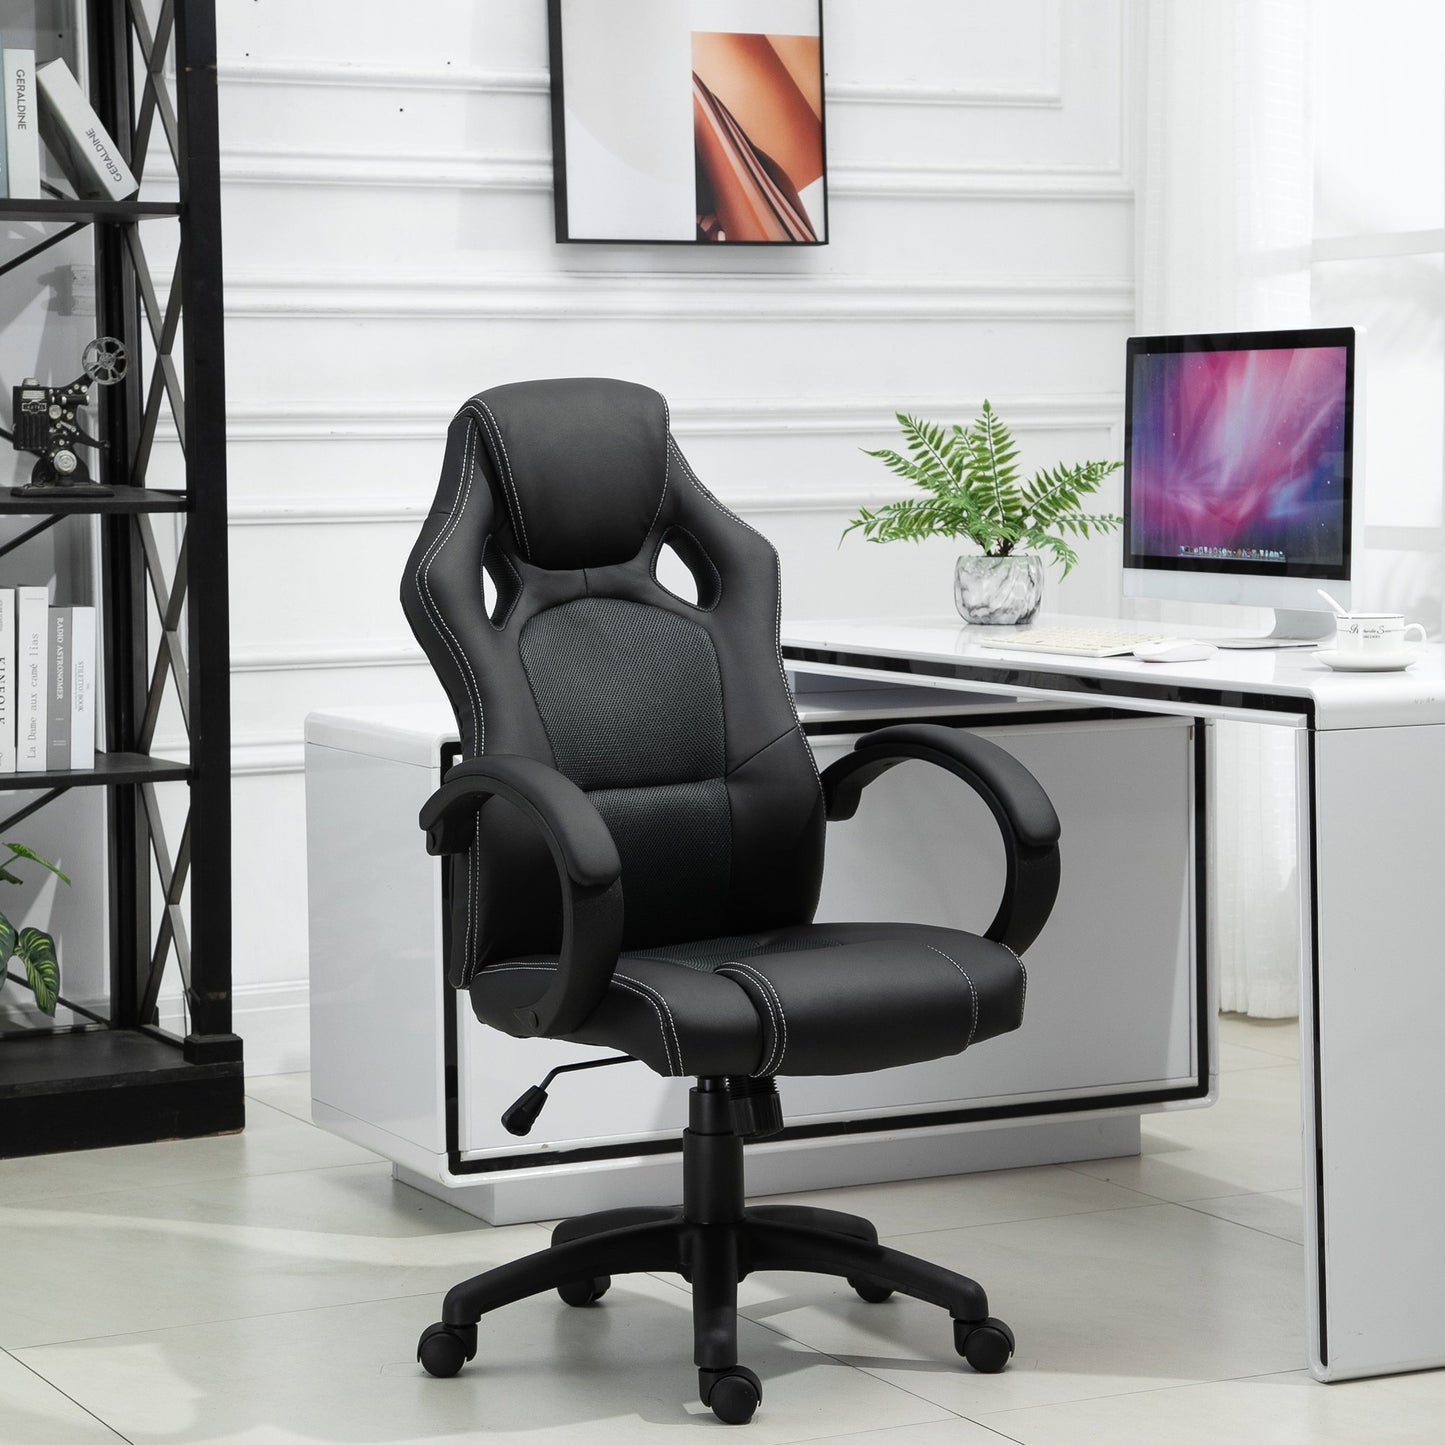 HOMCOM Racing Chair Gaming Sports Swivel PU Leather Office PC Chair Height Adjustable-Black/Grey